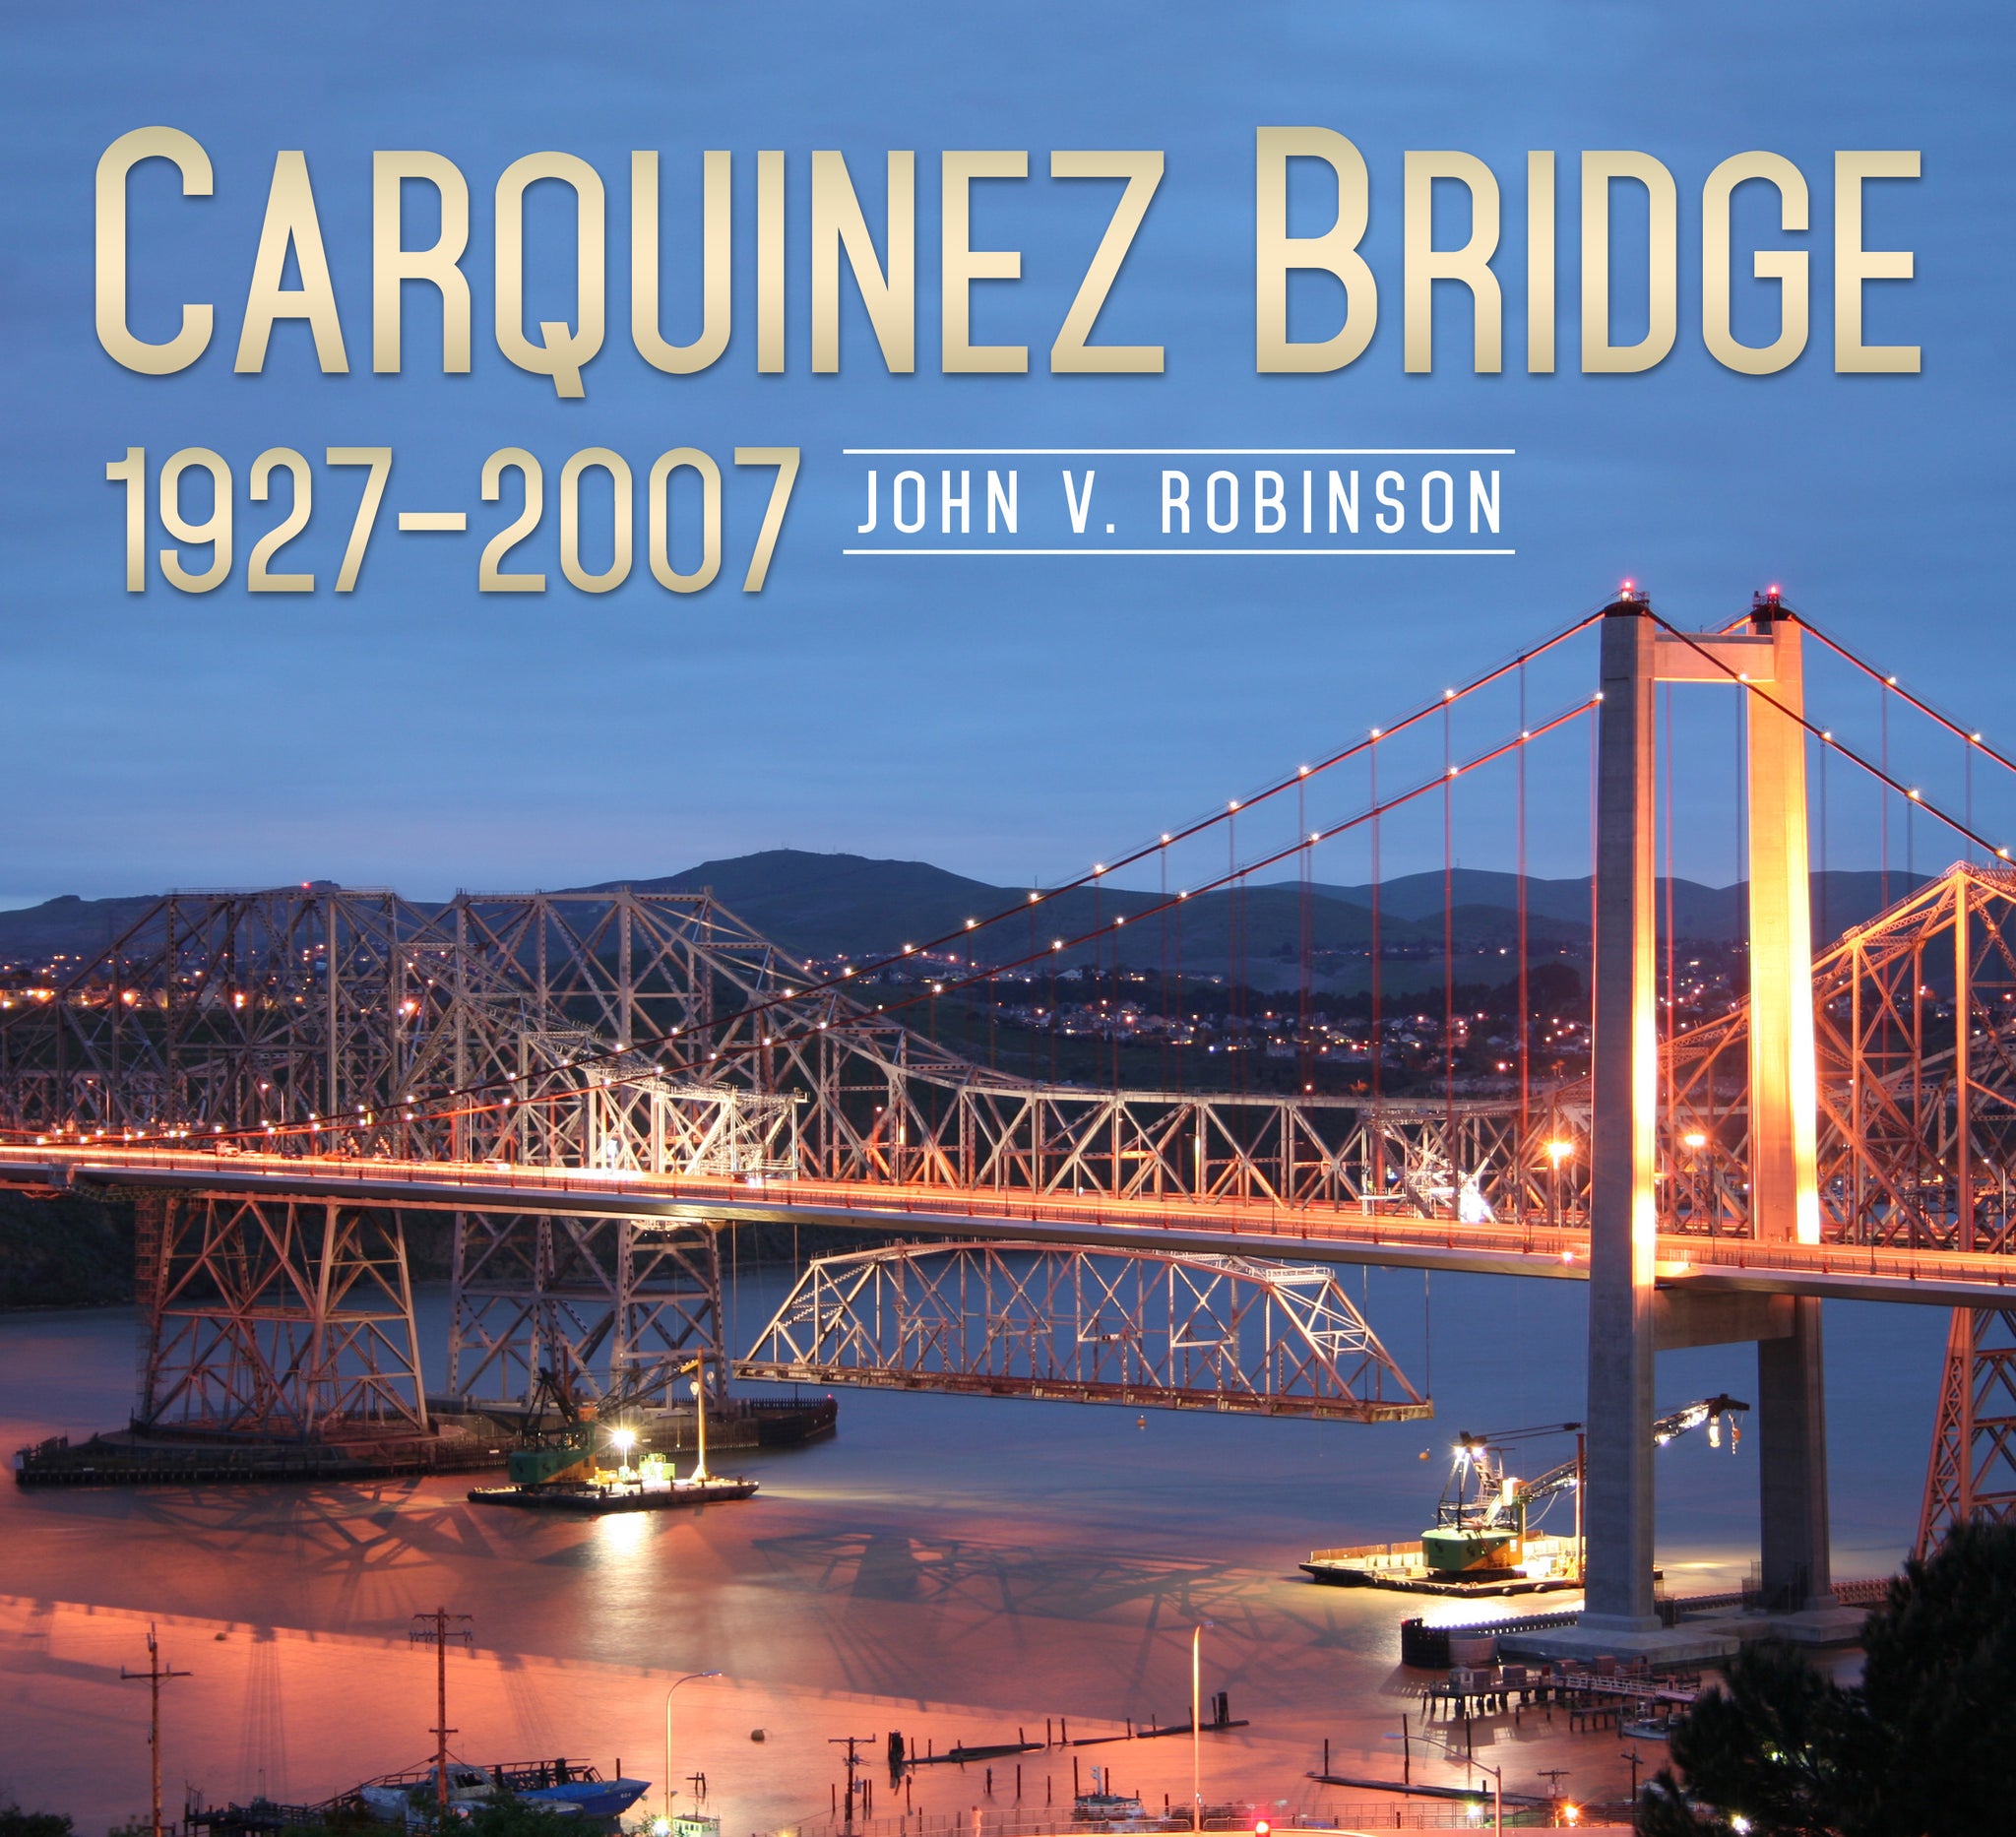 Carquinez Bridge: 1927-2007 - published by America Through Time